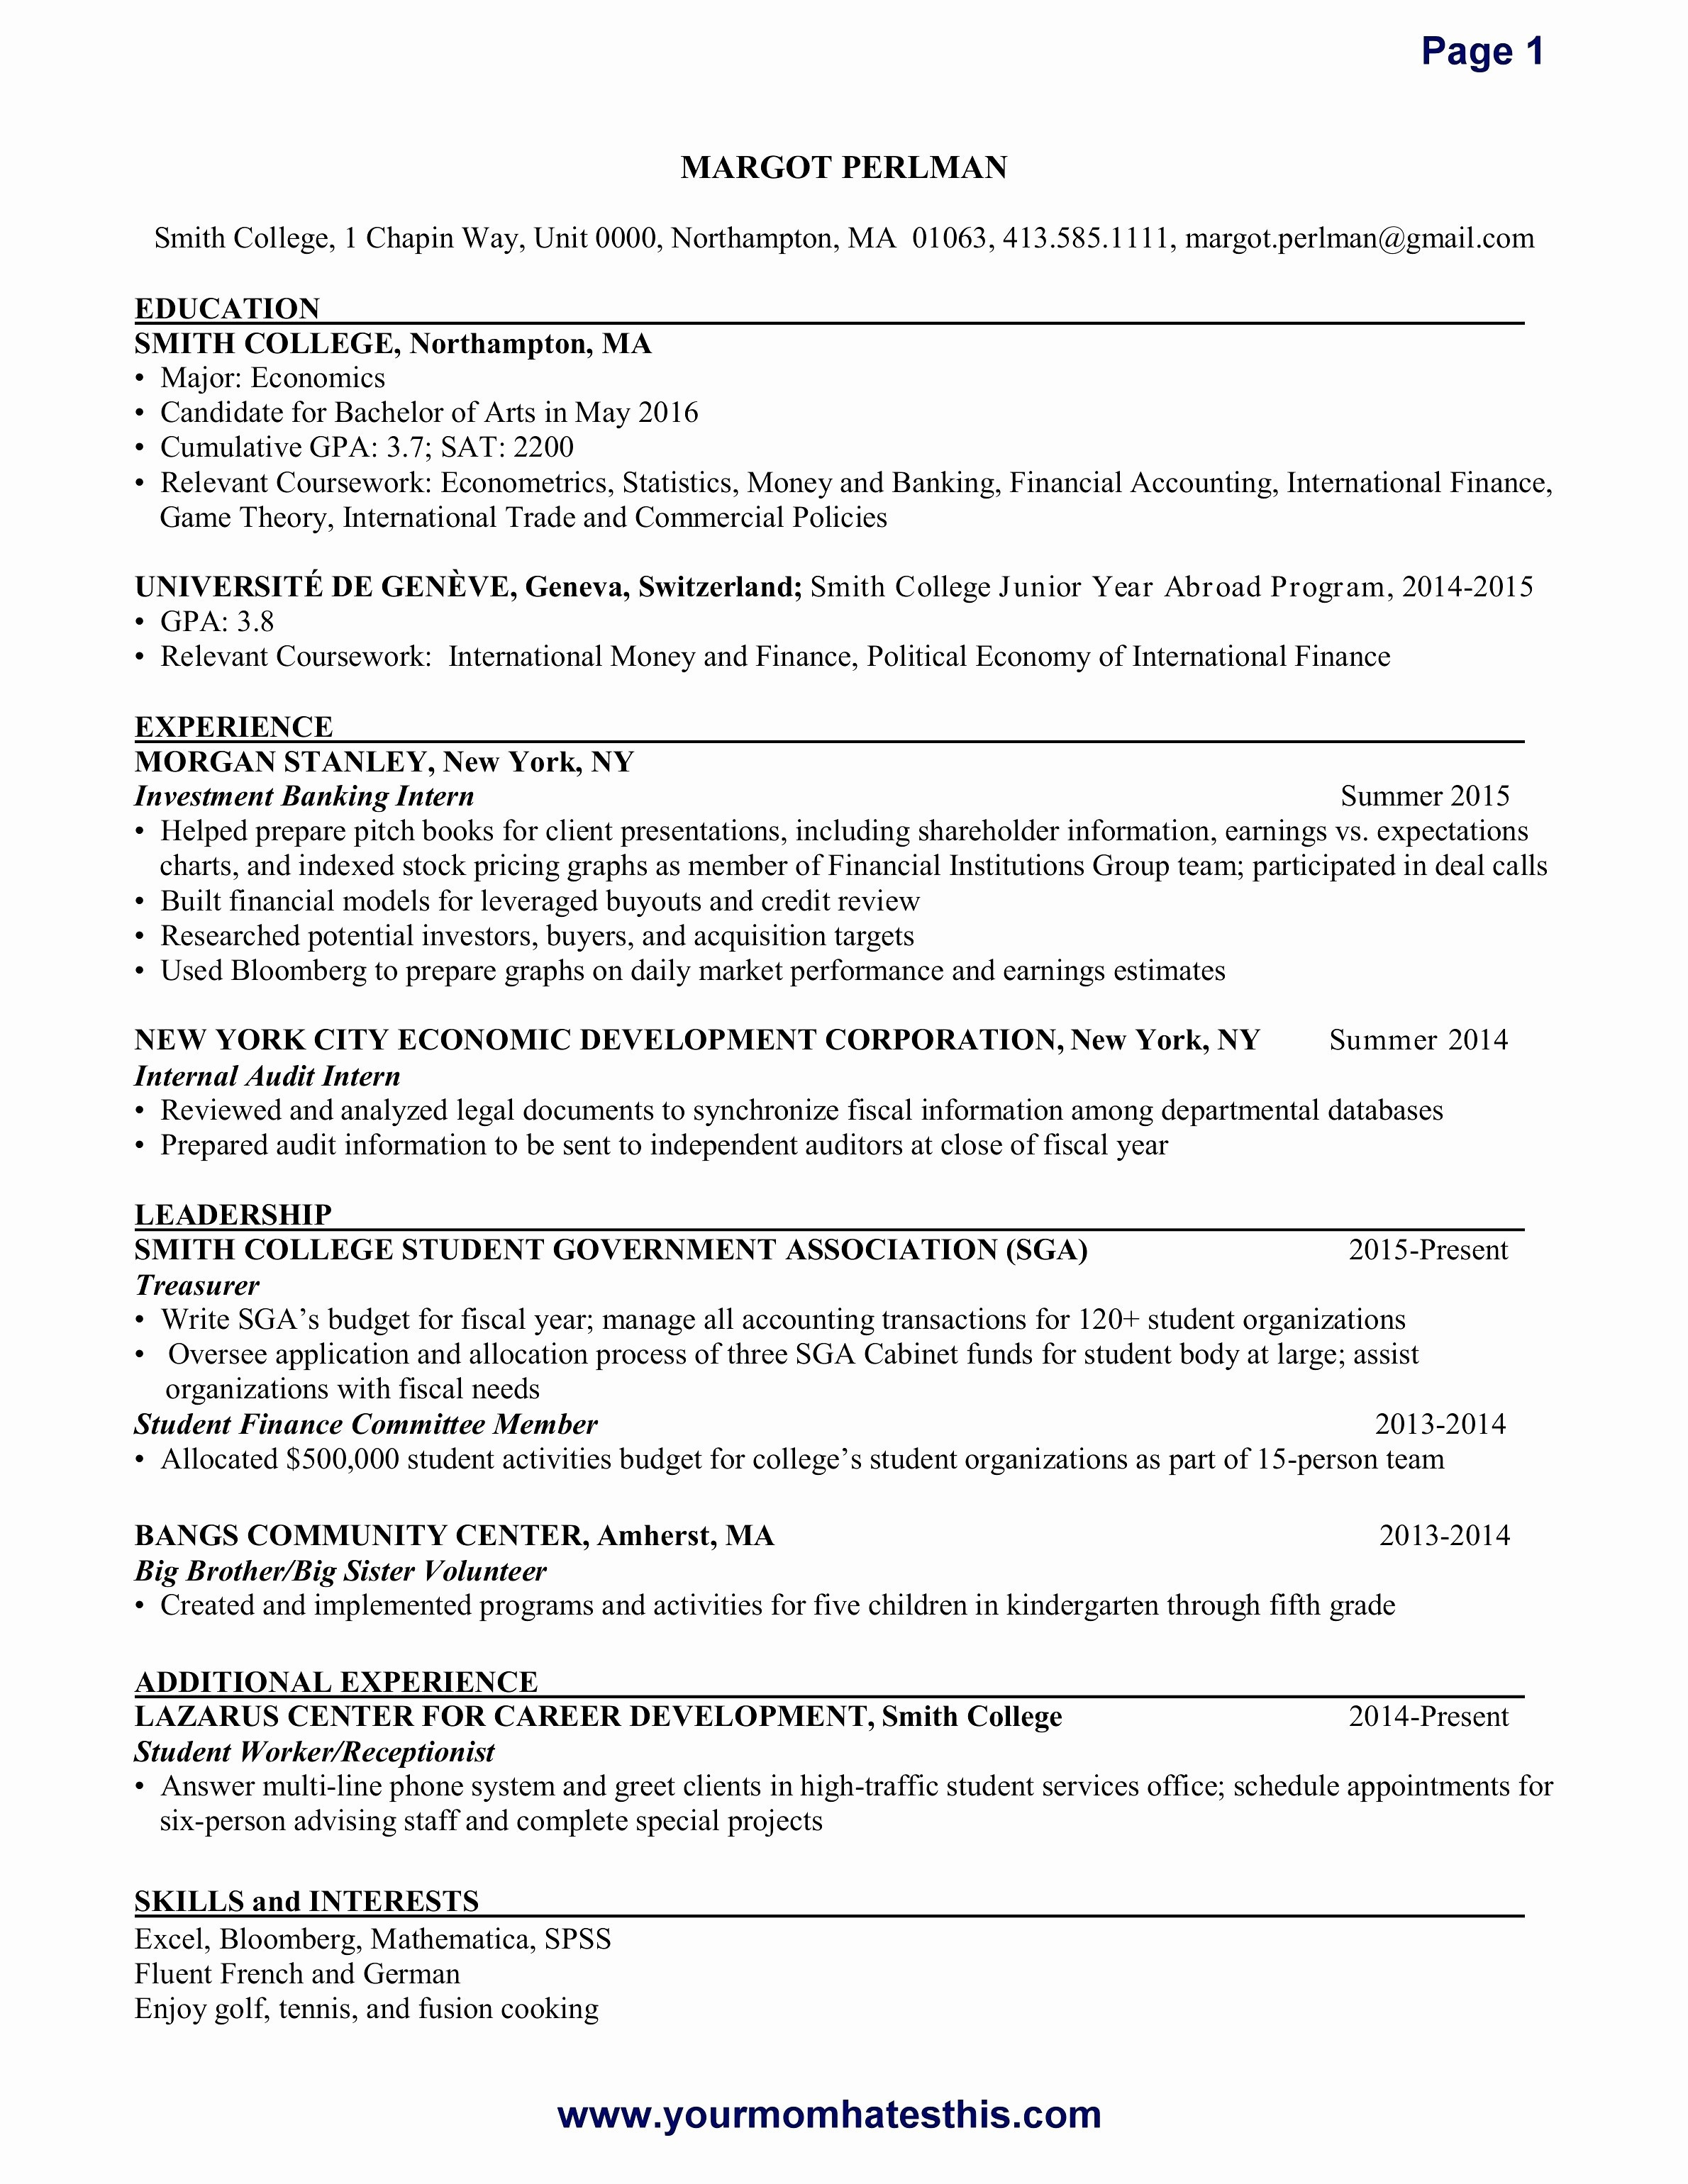 letter to investors template example-Write Resume Template Fresh Lovely Pr Resume Template Elegant Dictionary Template 0d Archives 18-s